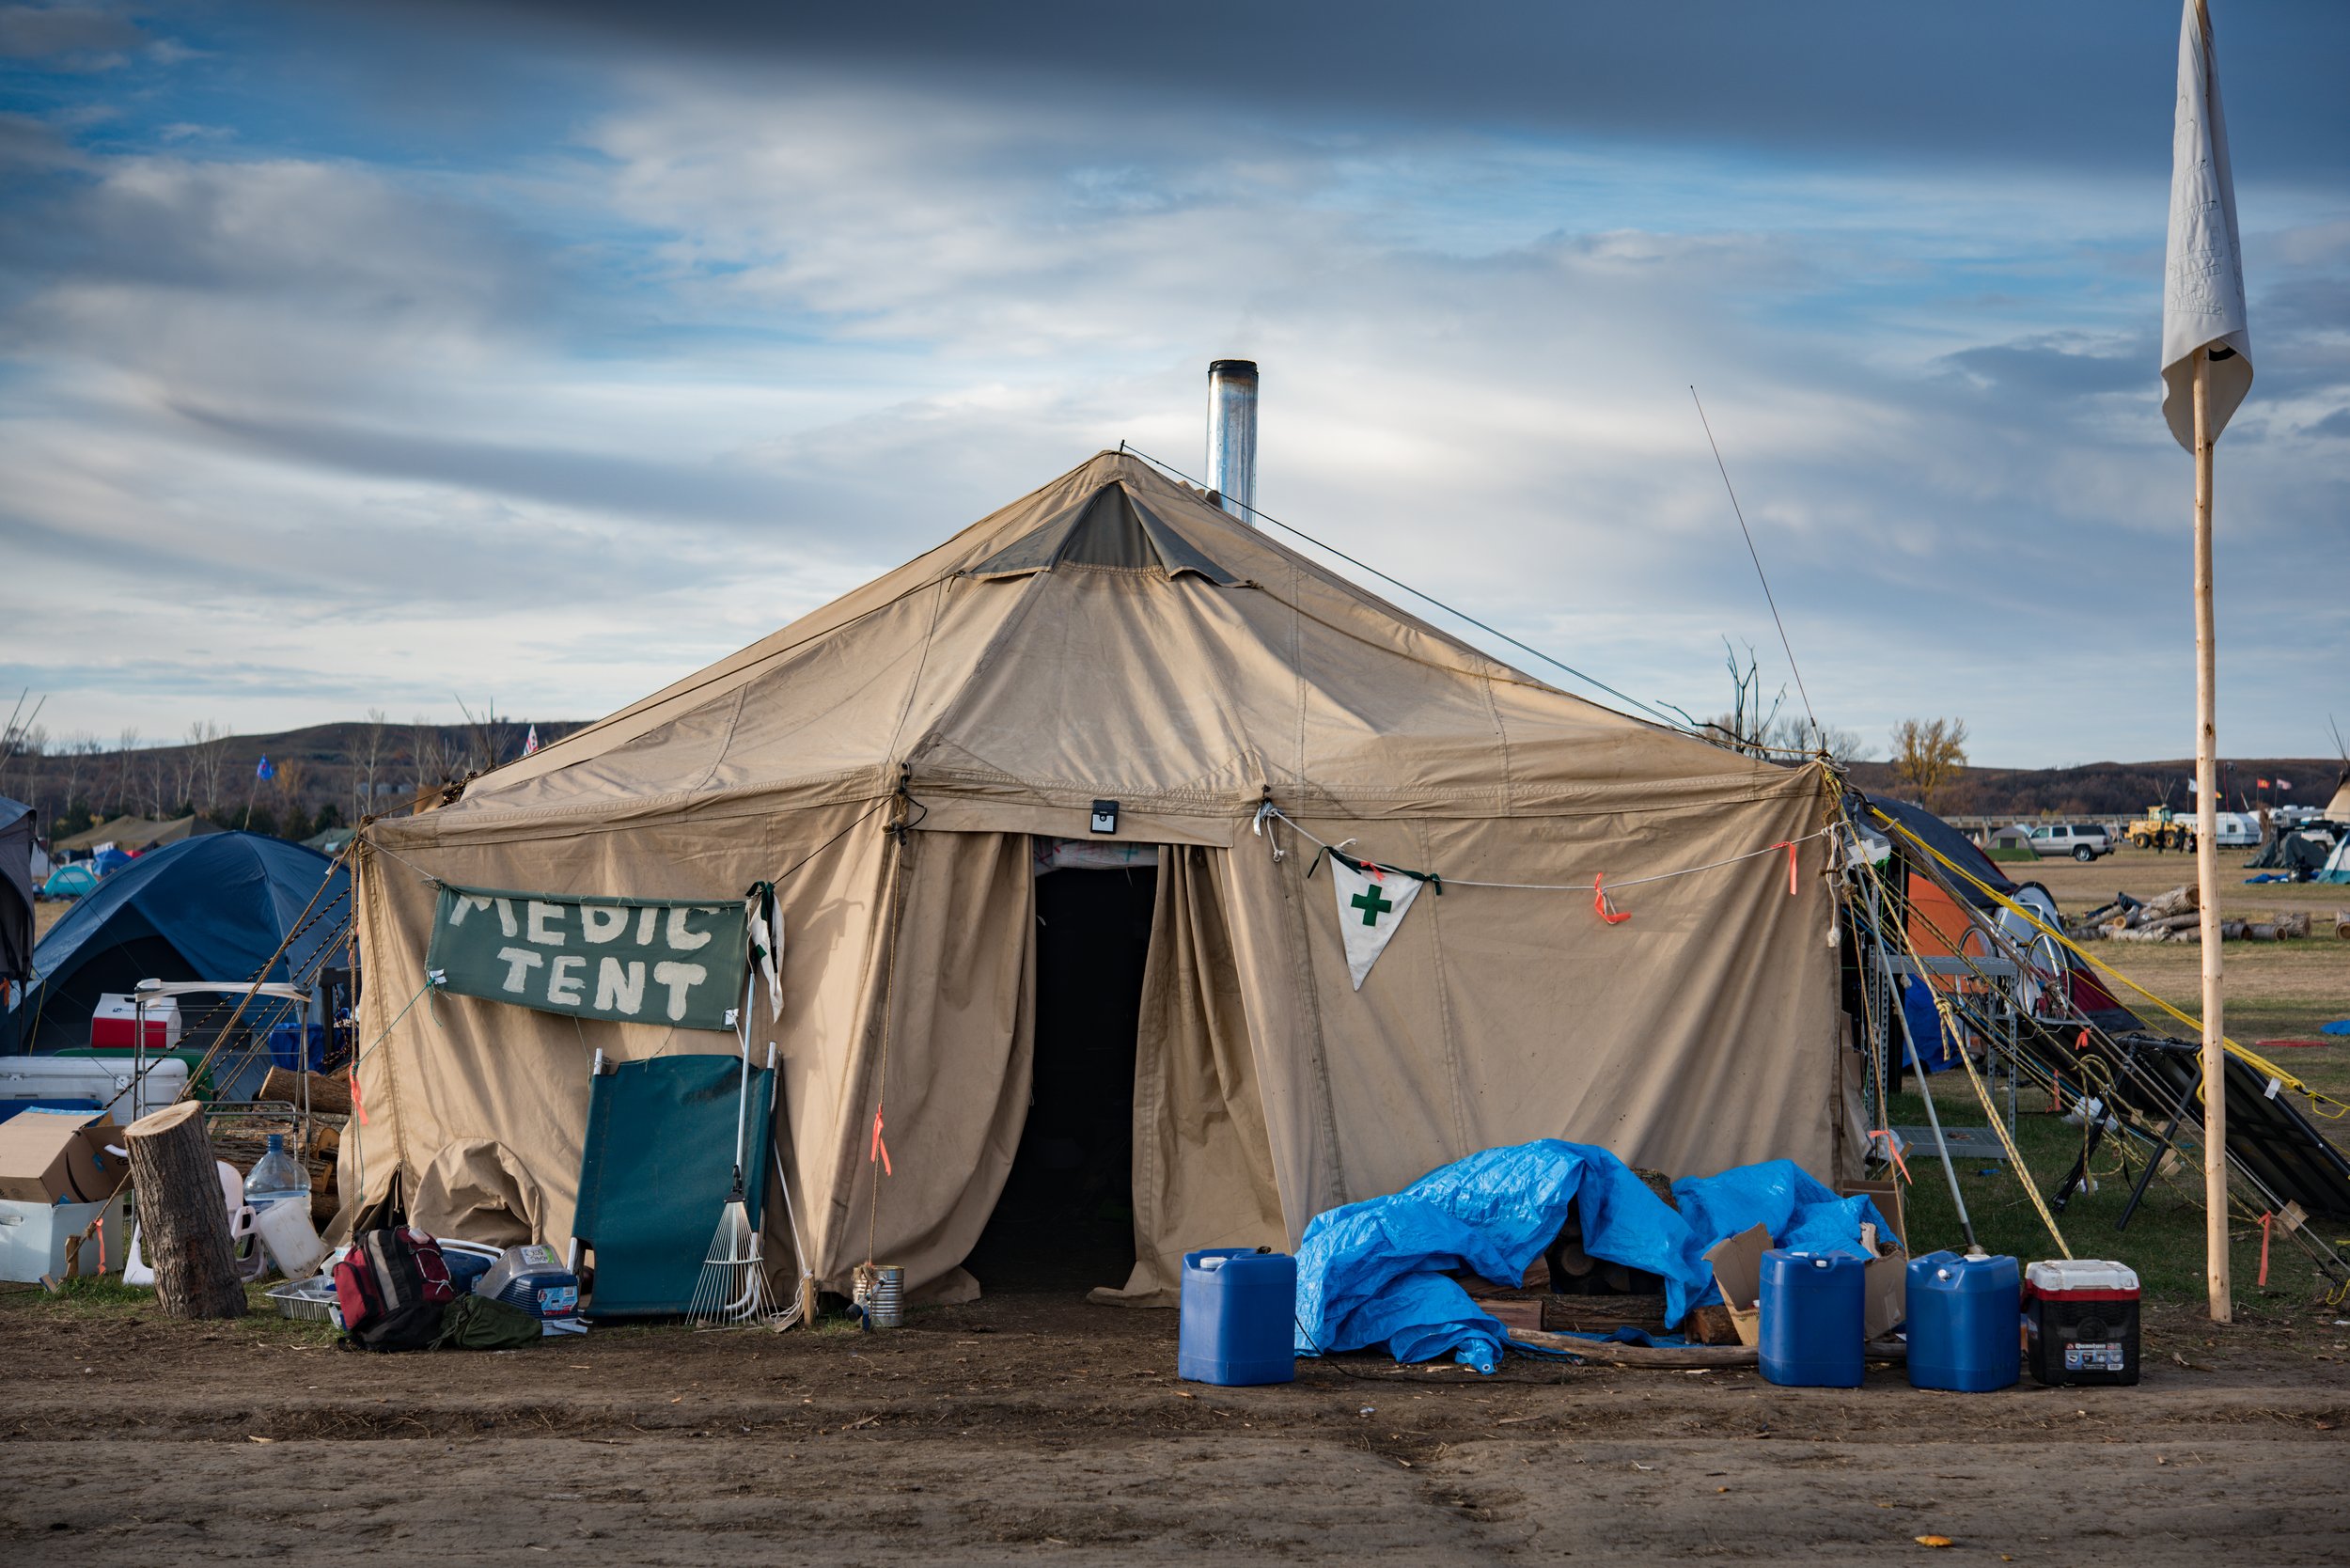  In the central part of the camp was a Medic tent that resembled a MASH triage unit in a combat zone. 